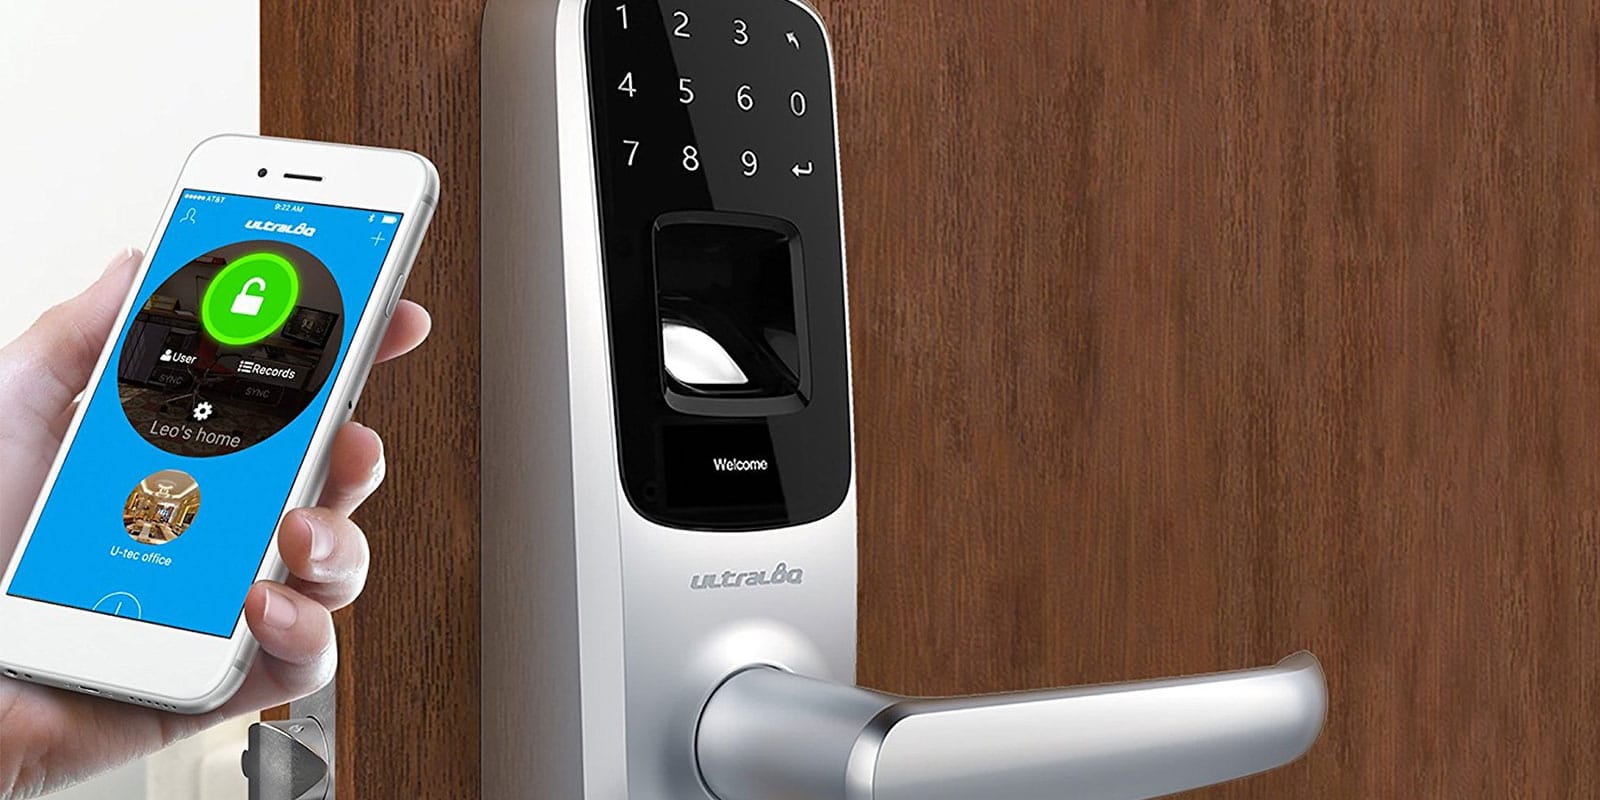 Great for anyone running an Airbnb, this programmable lock opens with private codes, fingerprint ID, and Bluetooth.